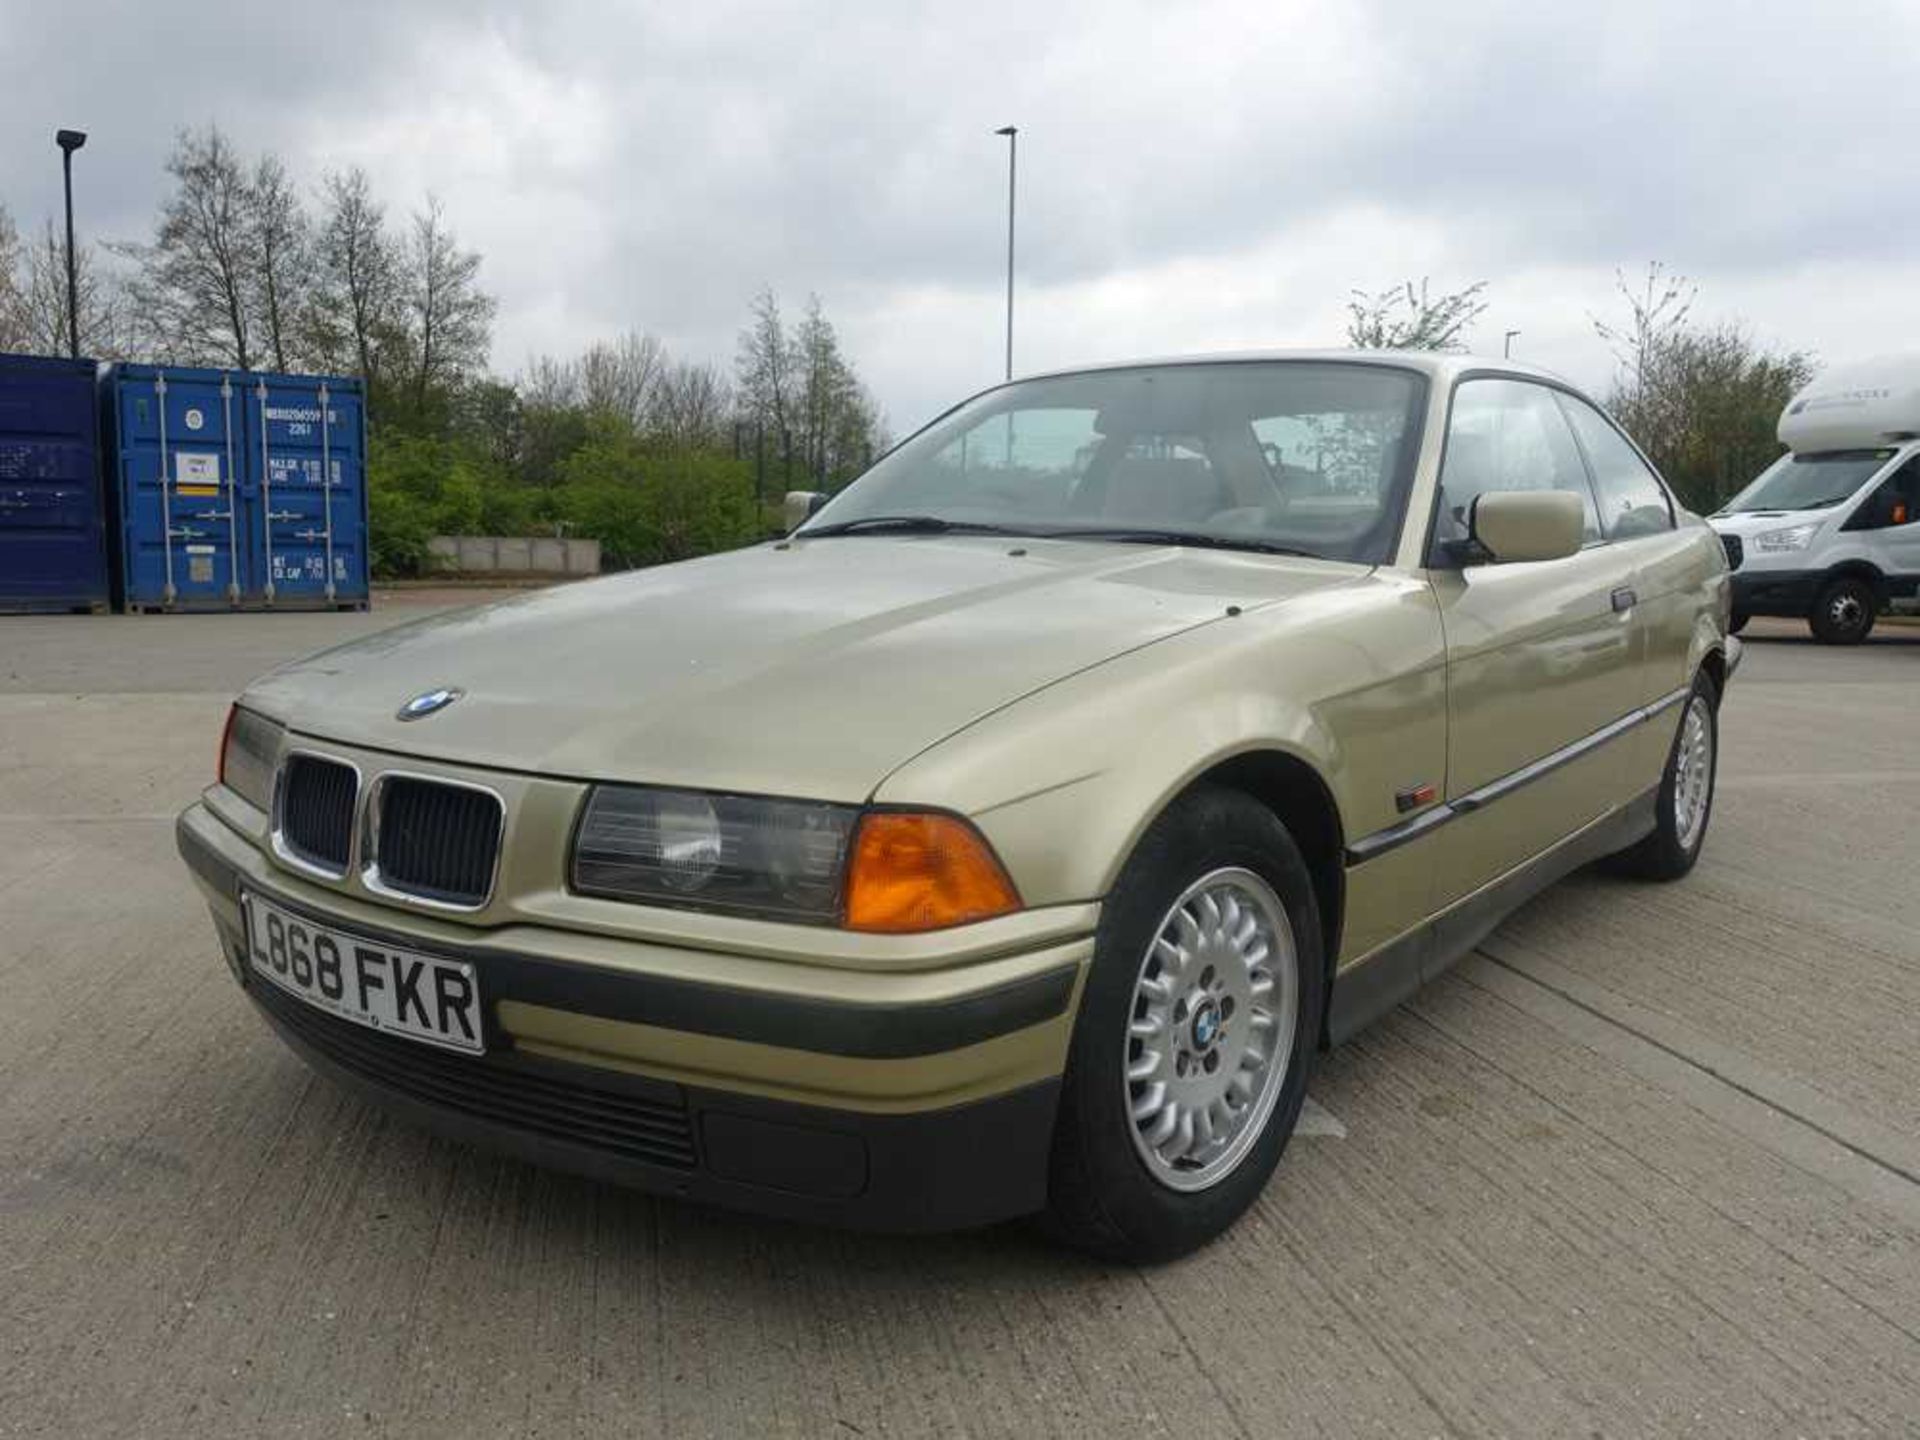 BMW 318 i S Auto Coupe in gold, first registered 16.04.1994, registration plate L868 FKR, 2 door, - Image 4 of 12